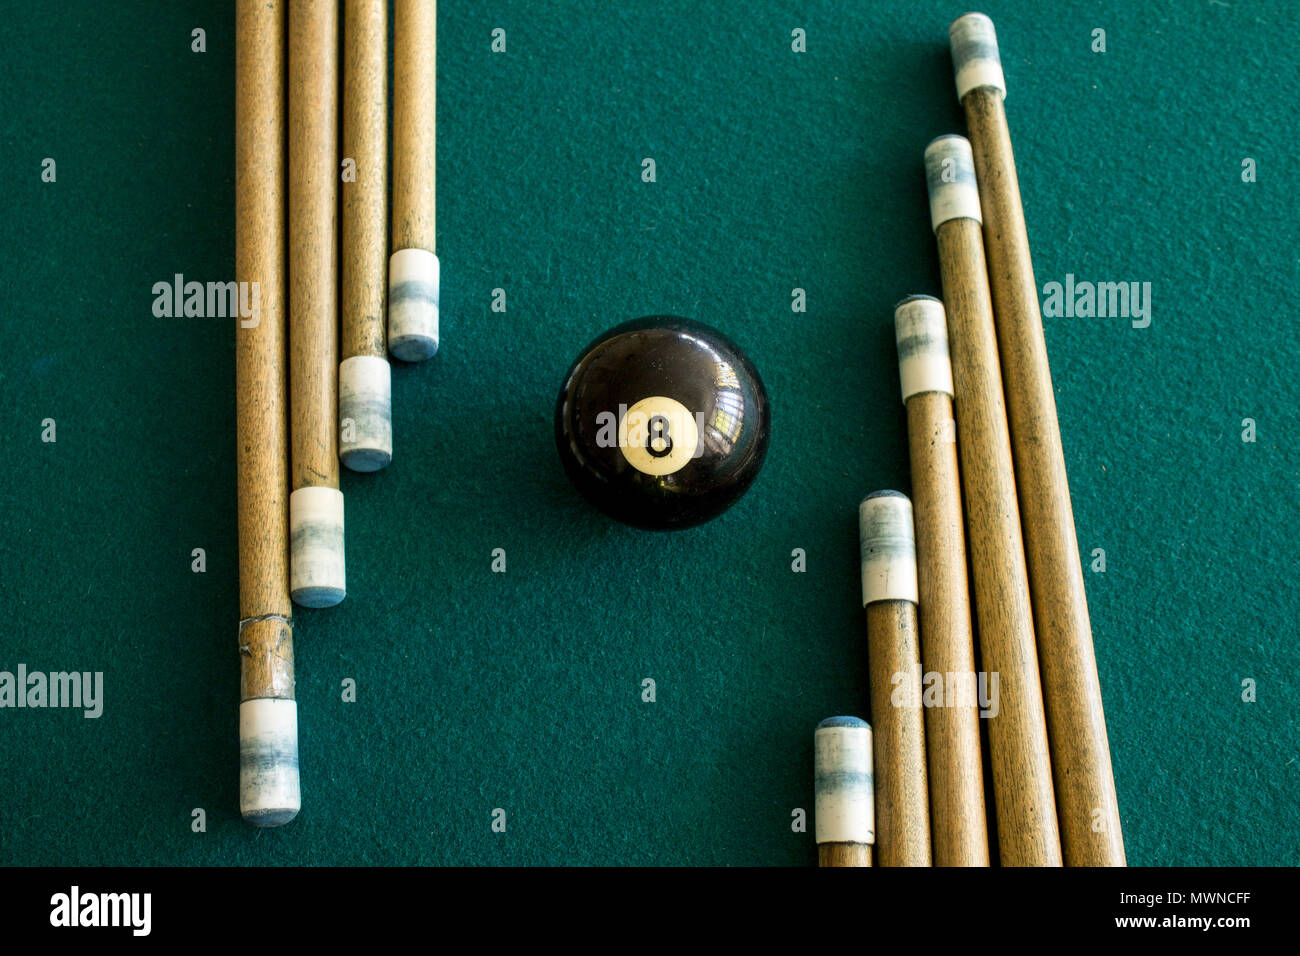 Eight ball billiard in the middle of a group of cues on a green table Stock Photo